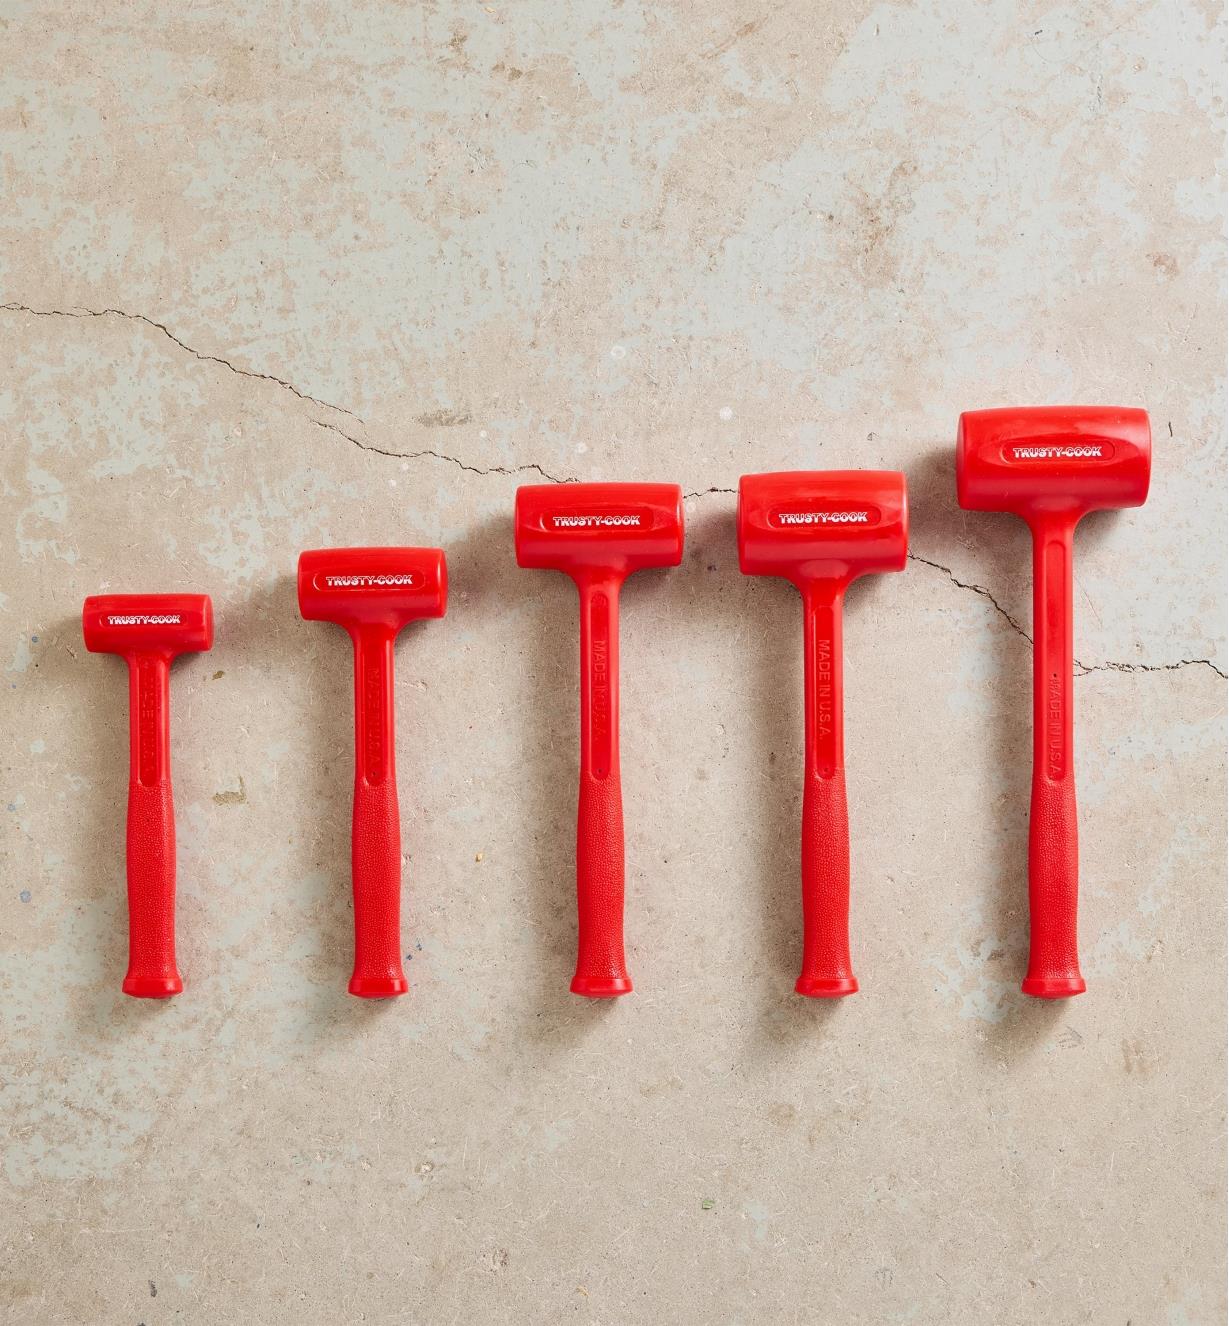 All sizes of dead-blow hammers lined up